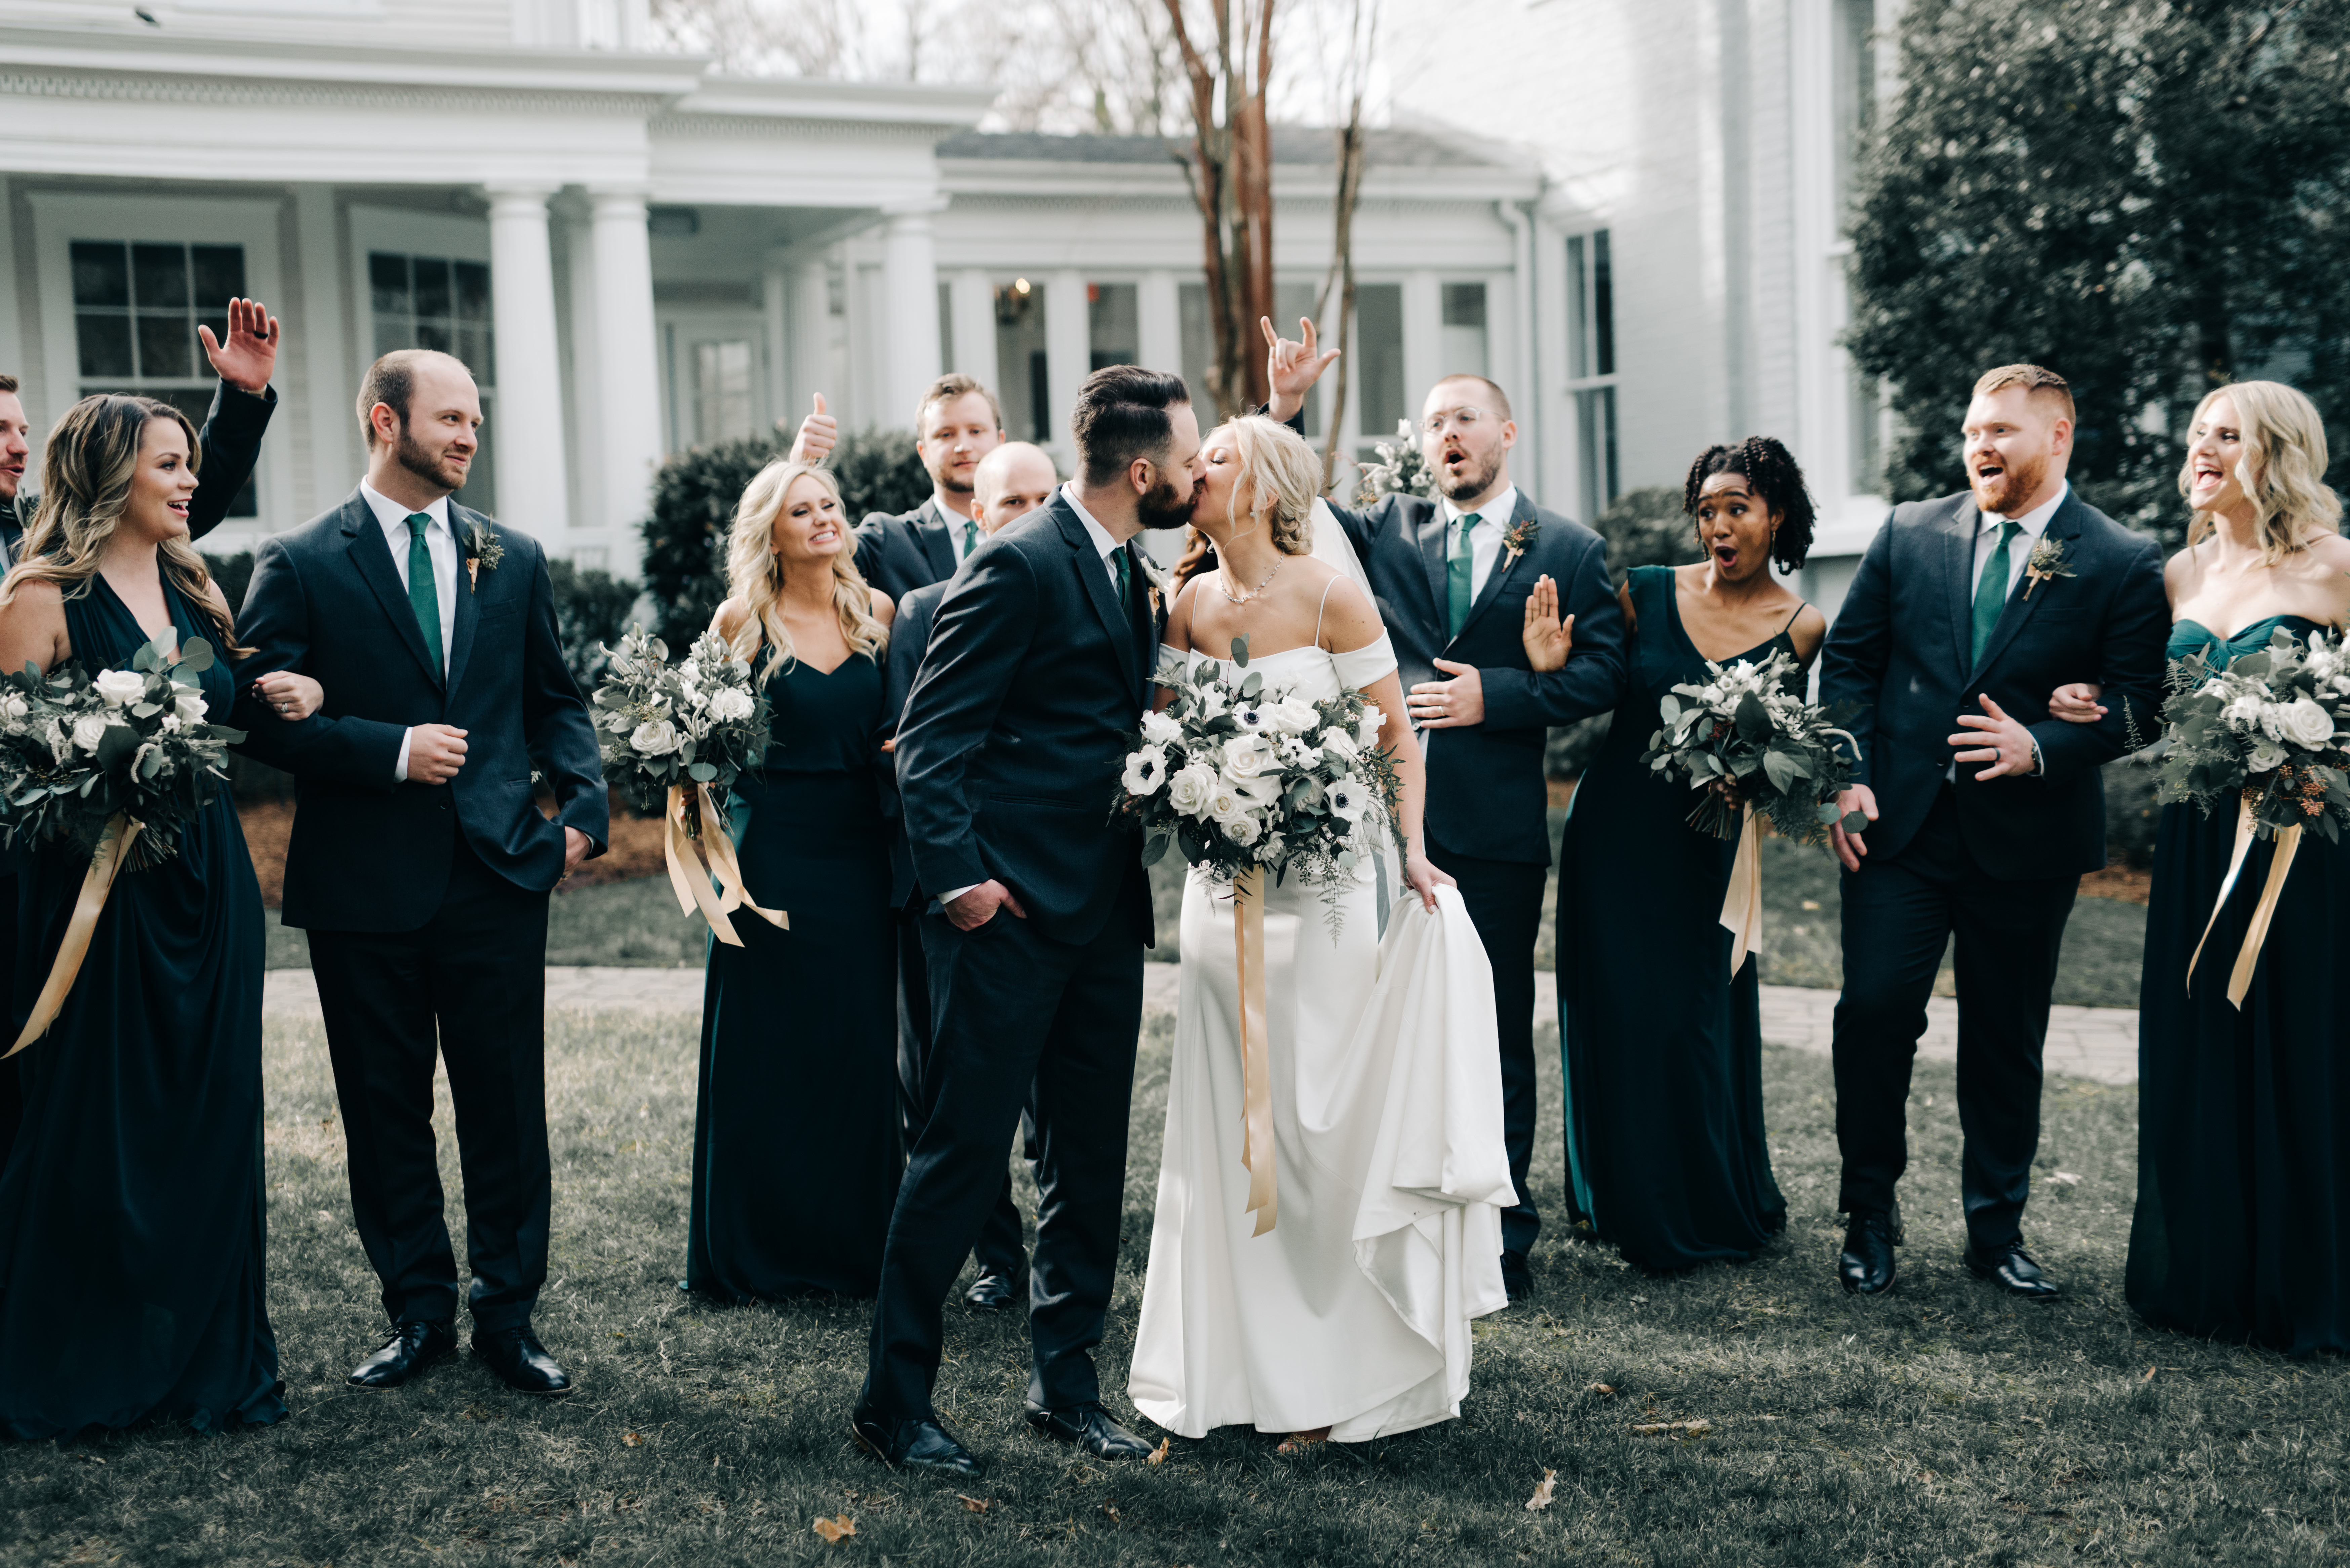 Bridal party at historic wedding venue in North Carolina for a winter wedding McAlister-Leftwich House | Greensboro, NC